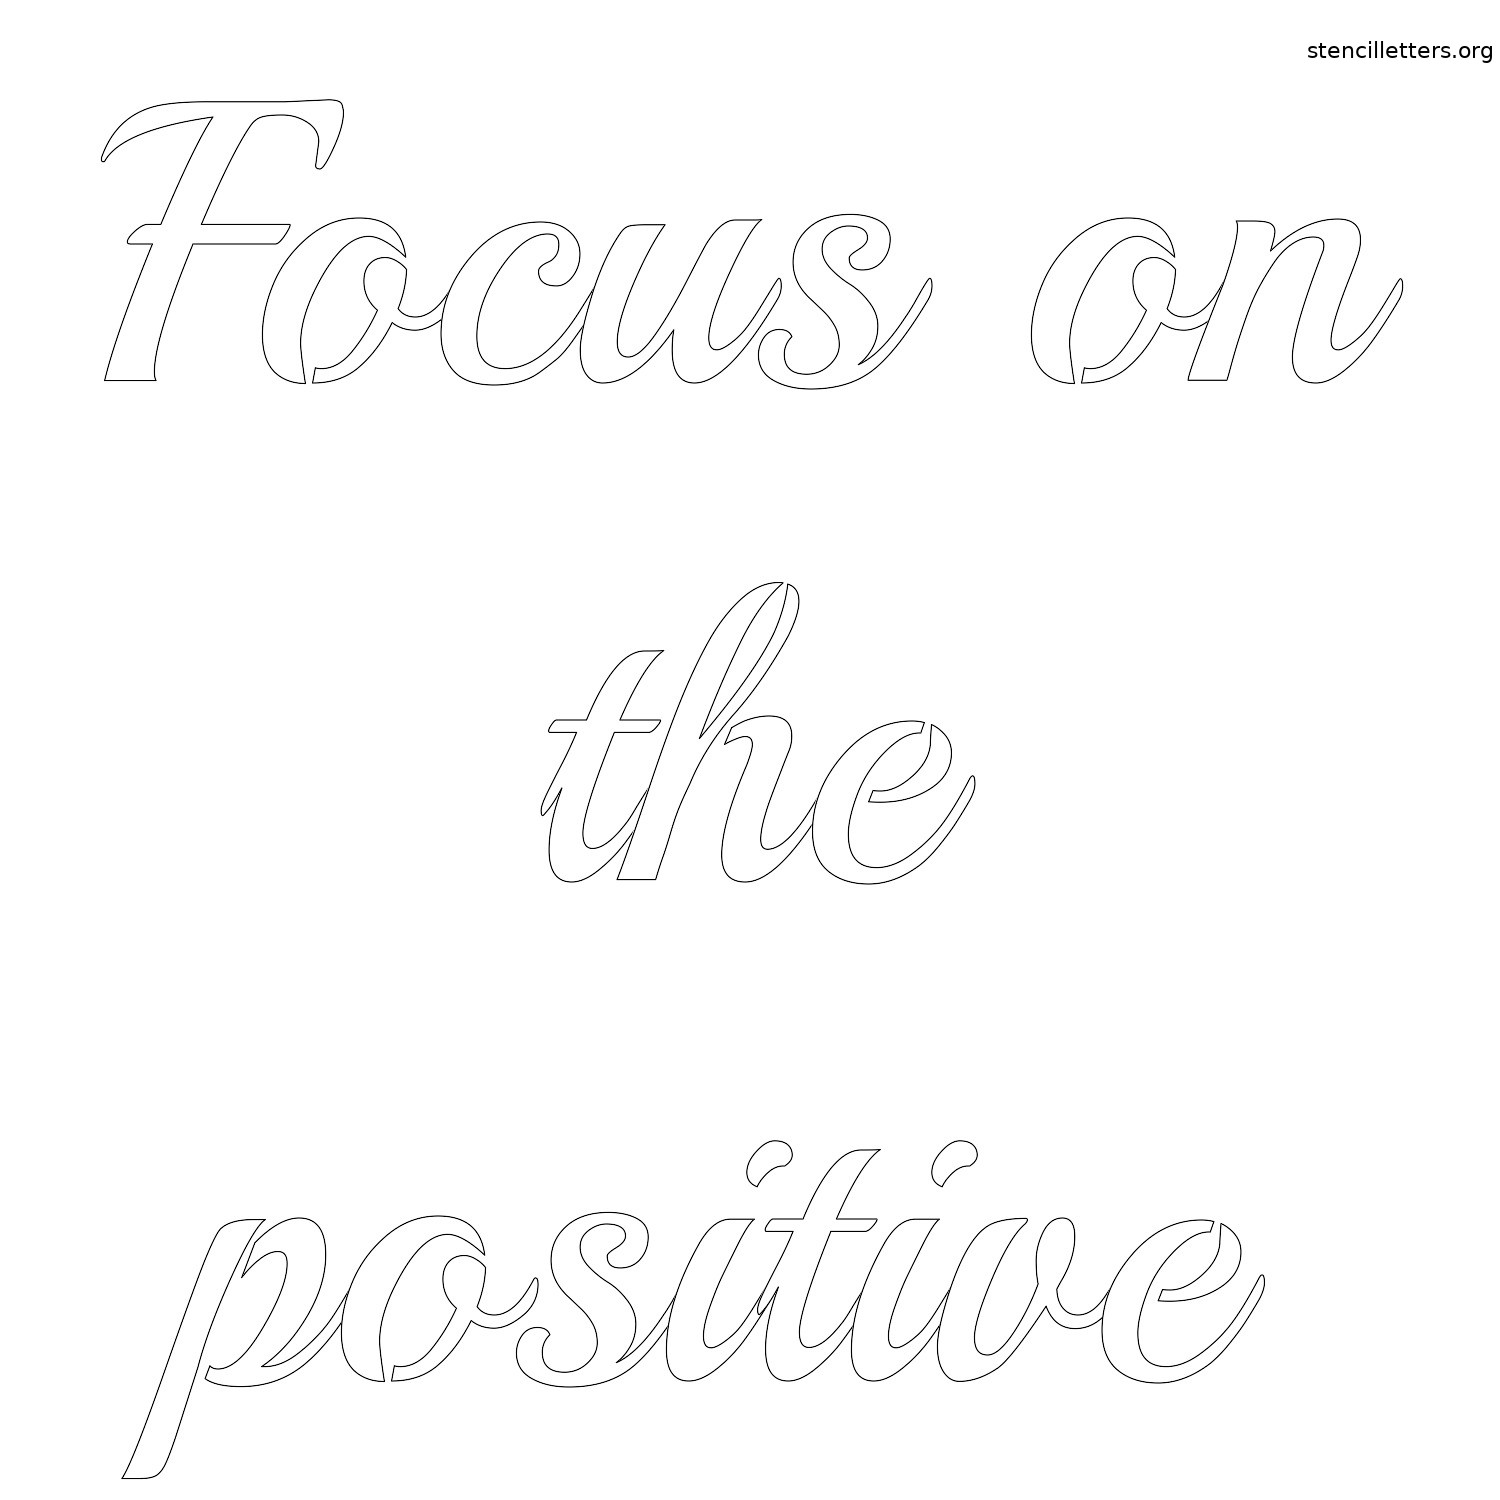 Focus On The Positive Free Printable Letter Stencil Stencil Letters Org